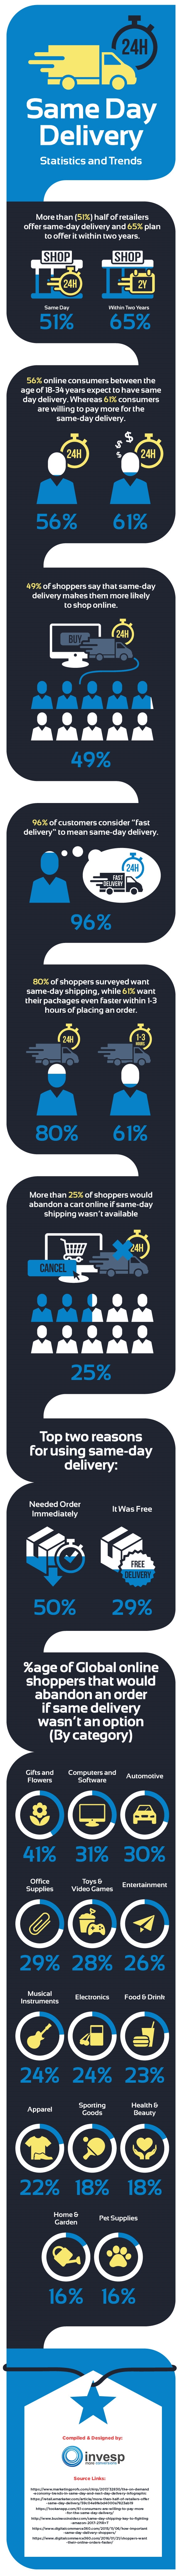 The Growing Importance of Same Day Delivery for Online Consumers [Infographic]